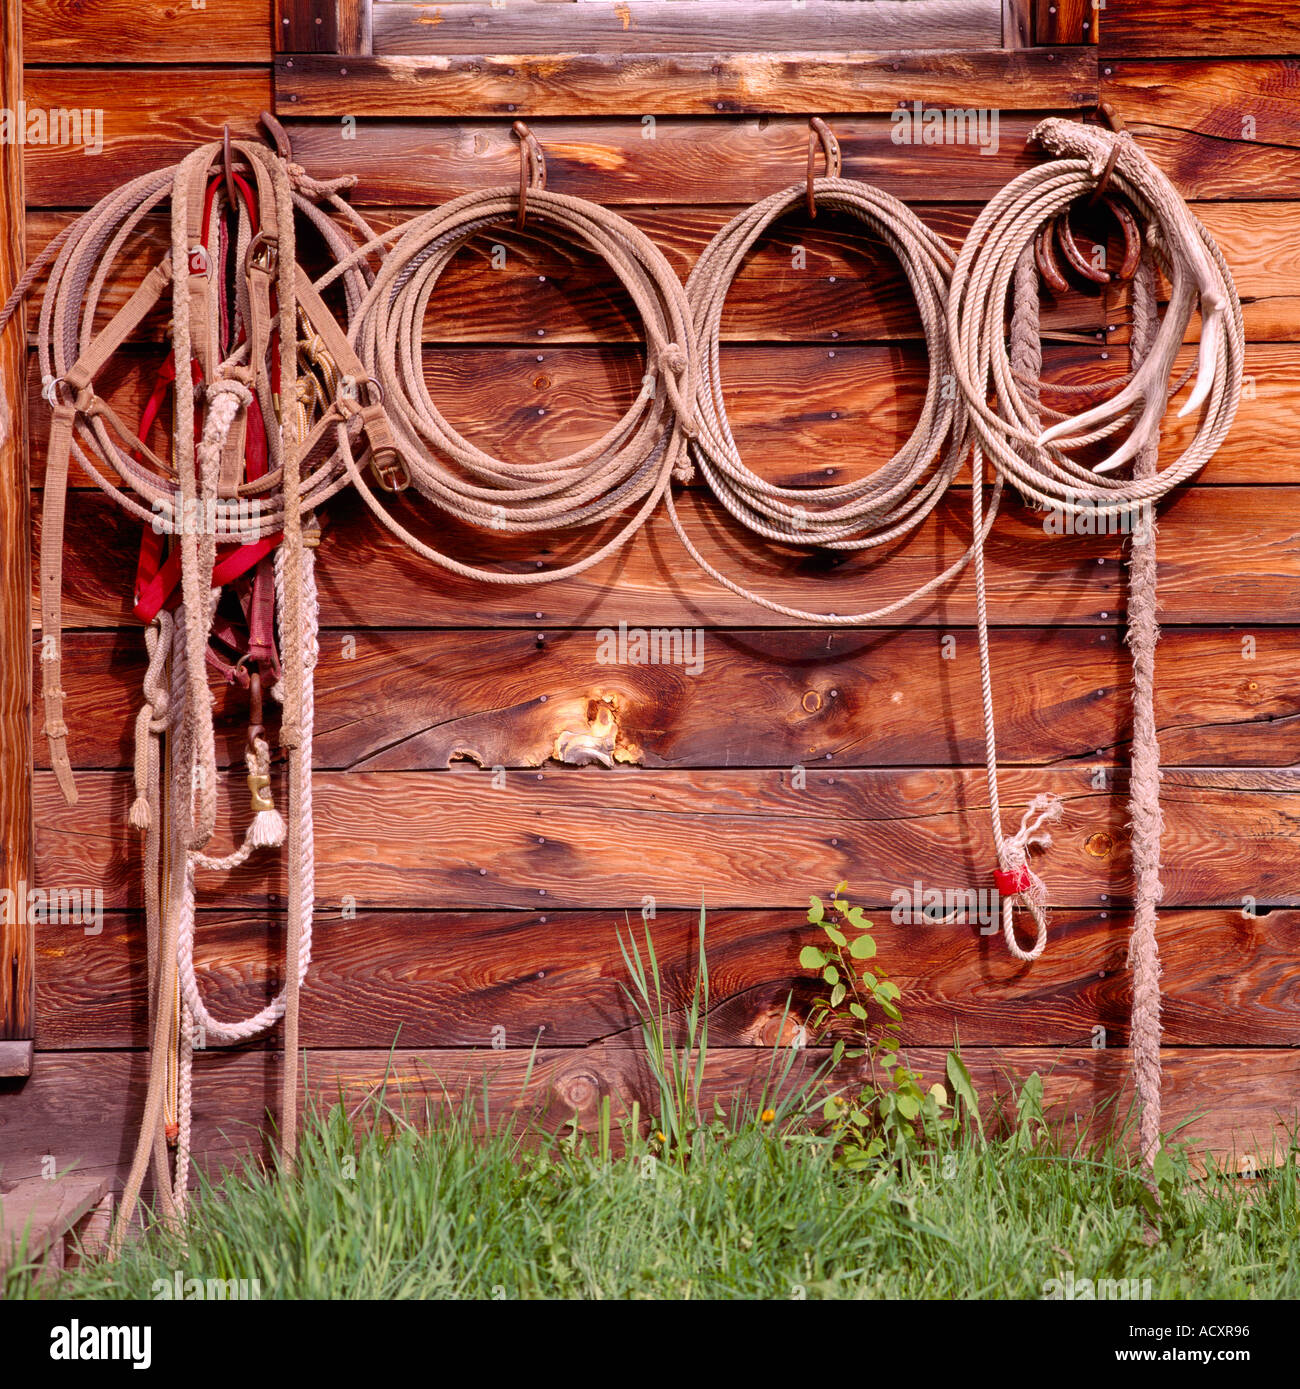 Cowboy Lassos hanging in a Row on Side Wall of Old Weathered Wood Cabin / Ranch Building Stock Photo